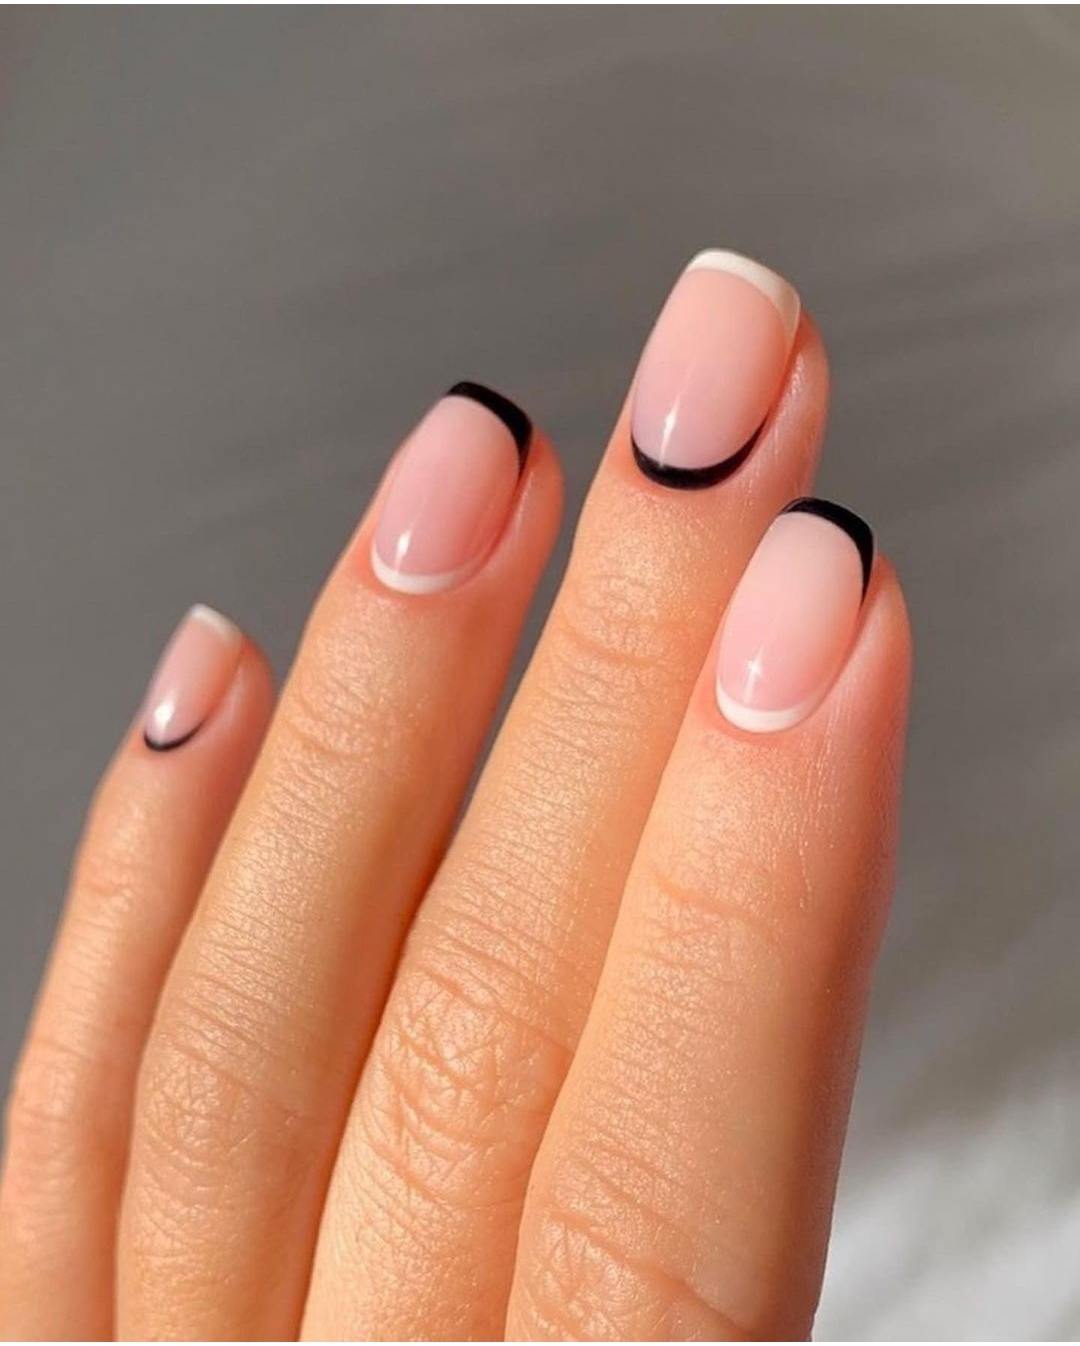 35 Nail Designs For 2022 You’ll Want To Try Immediately images 8